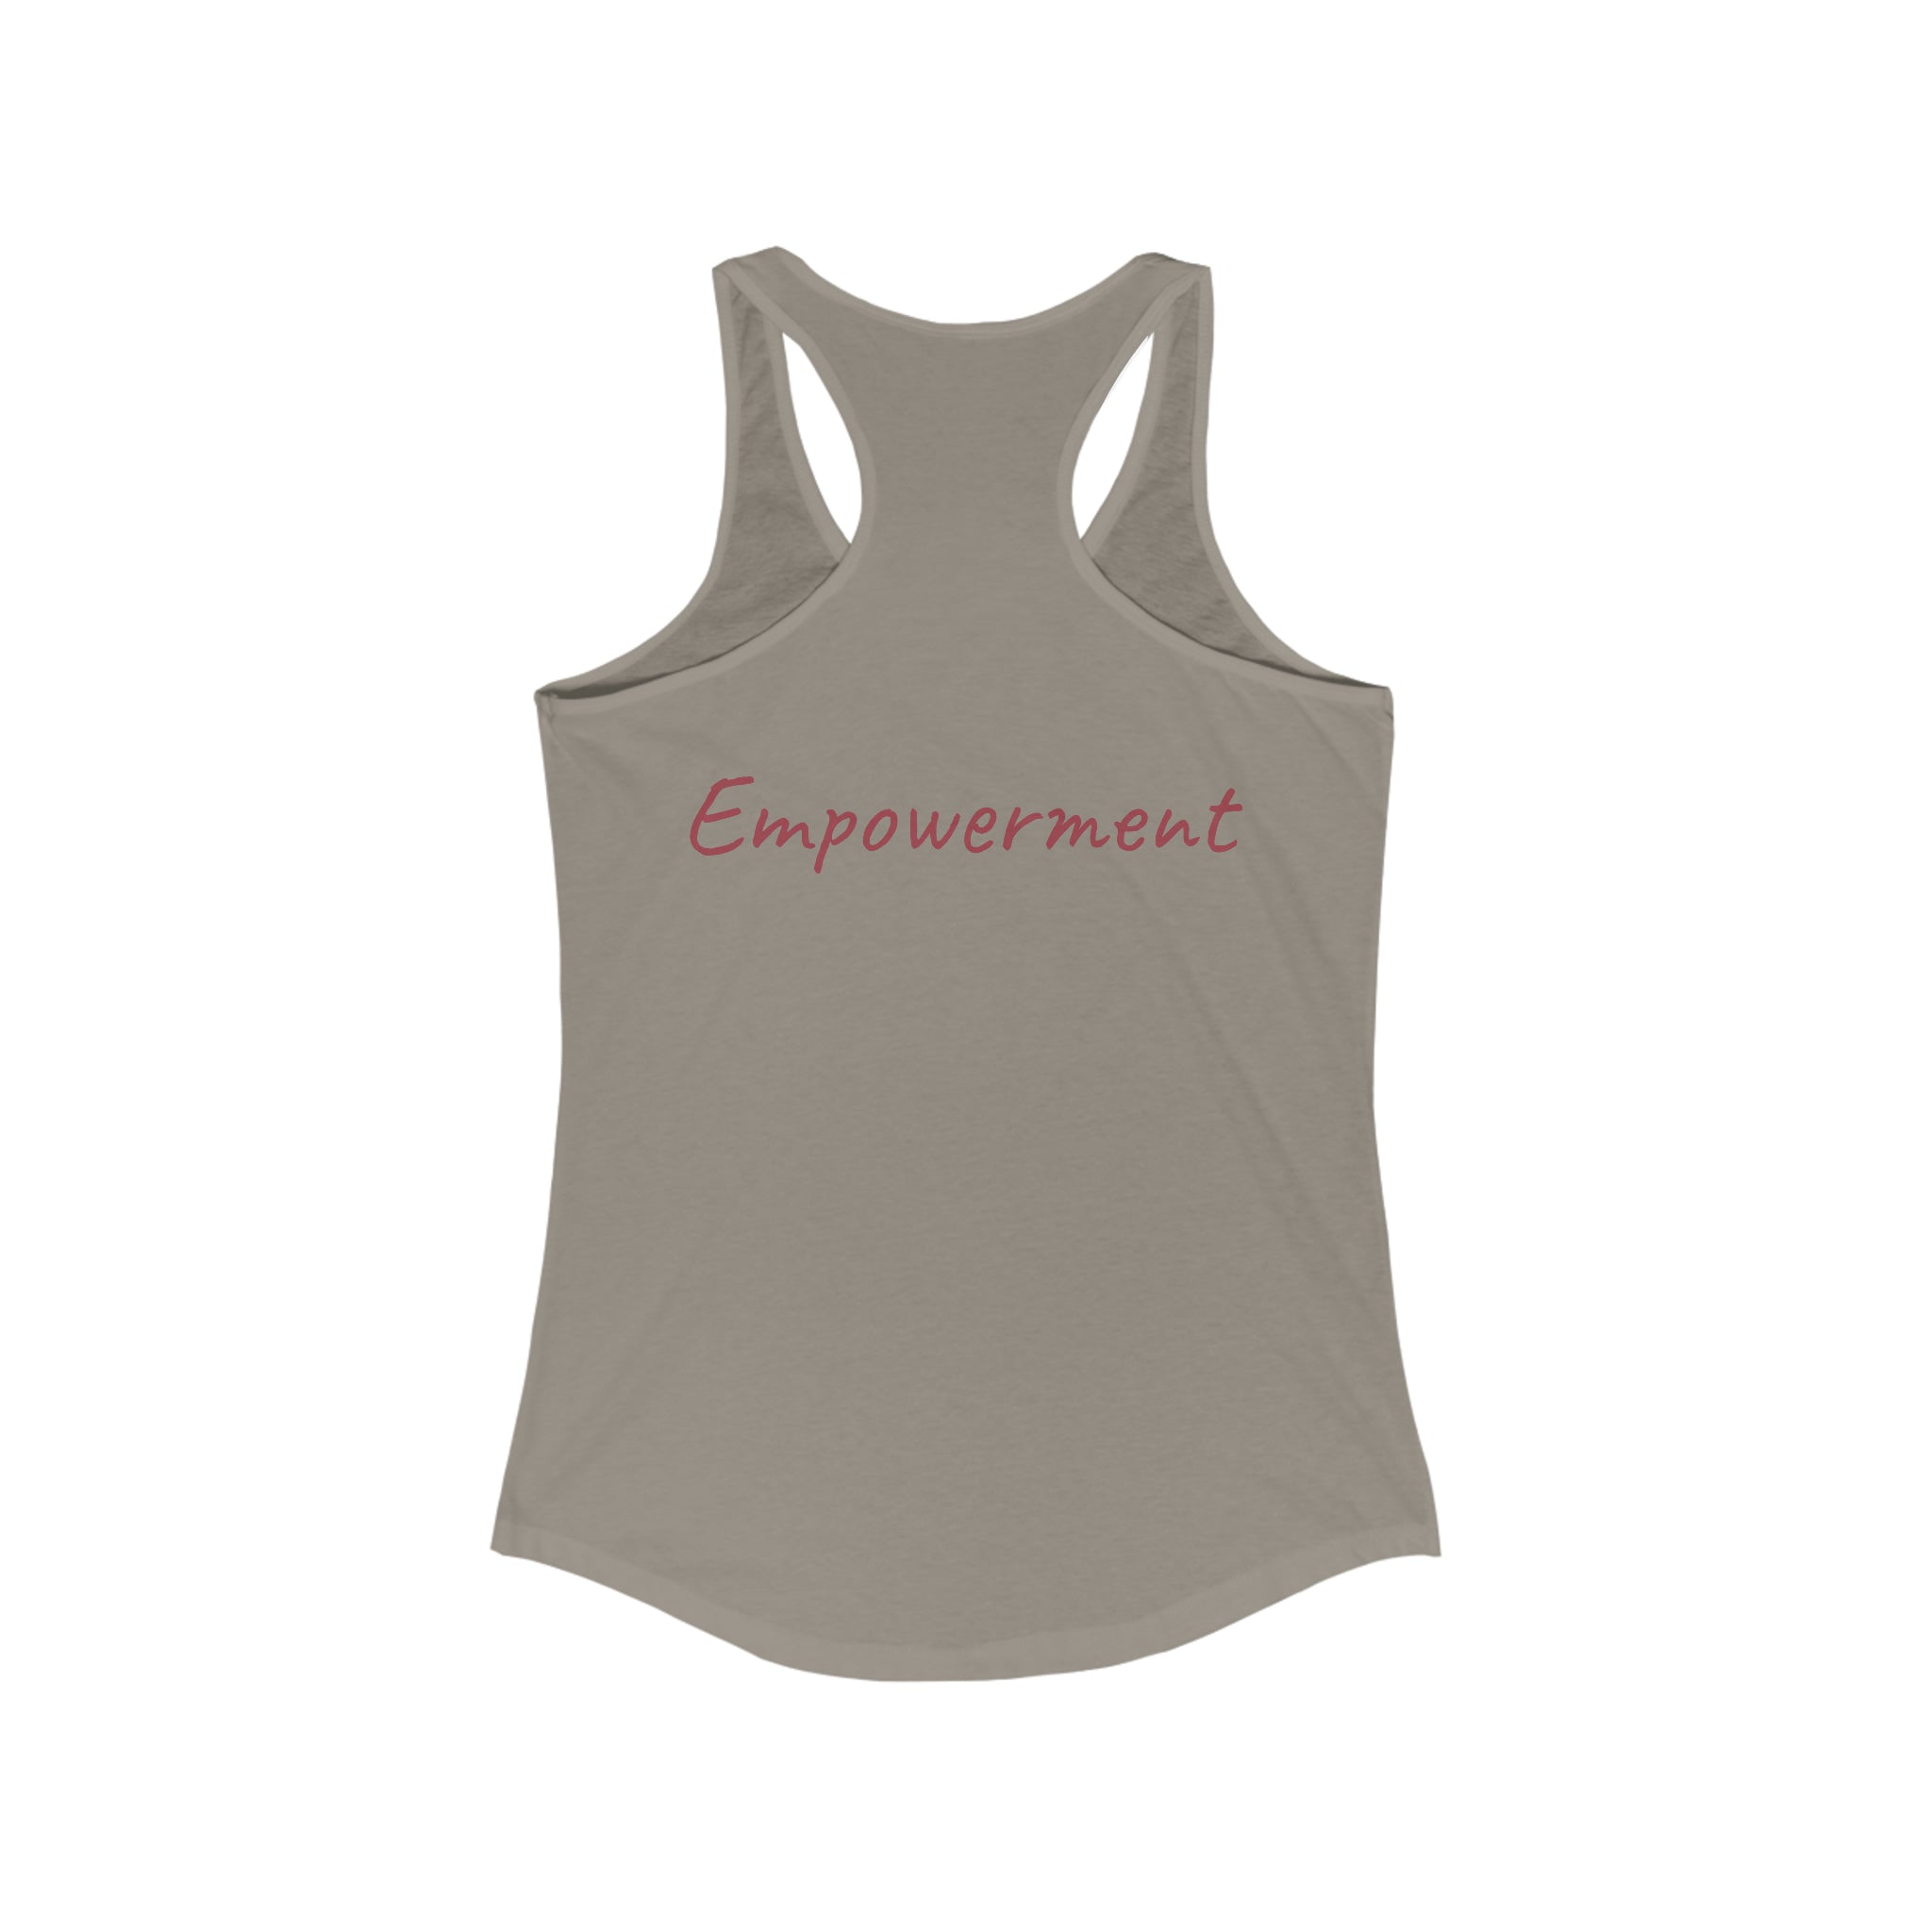 Empowerment Racerback: Fashion meets advocacy Solid Warm Gray Activewear Athletic Tank Gym Clothes Performance Tank Racerback Sleeveless Top Sporty Apparel Tank Top Women's Tank Workout Gear Yoga Tank Tank Top 4708032993004285017_2048_c4377f45-b329-457d-a2be-2b4f2bbc501c Printify